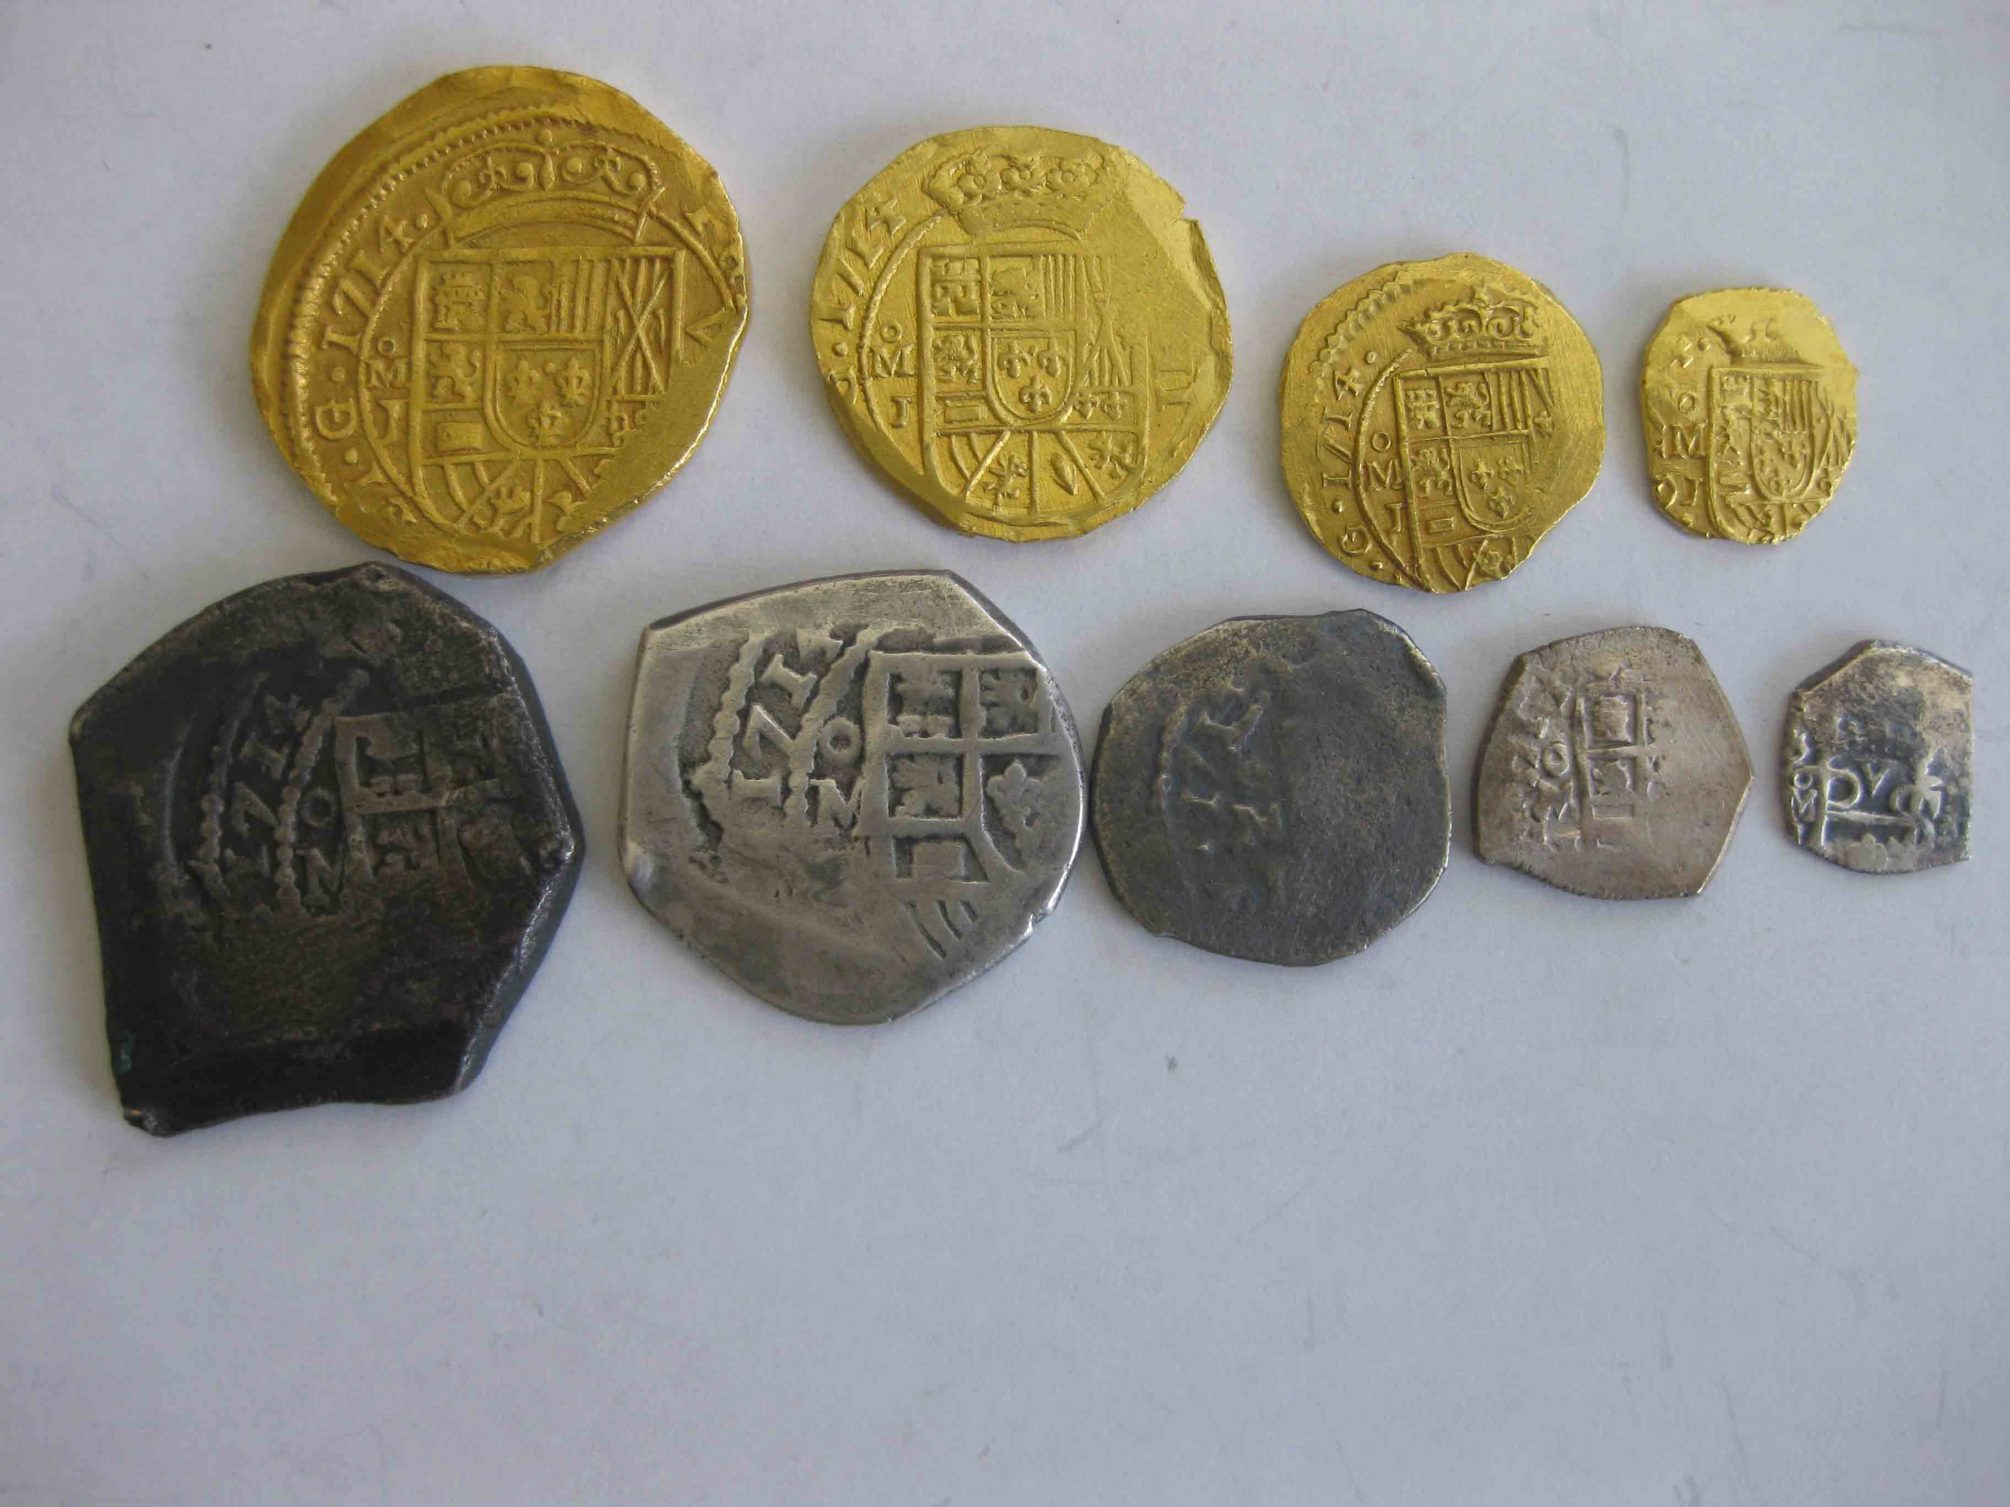 Mexico 1714 silver cobs and a complete set of Mexico 8 Escudos from 1714